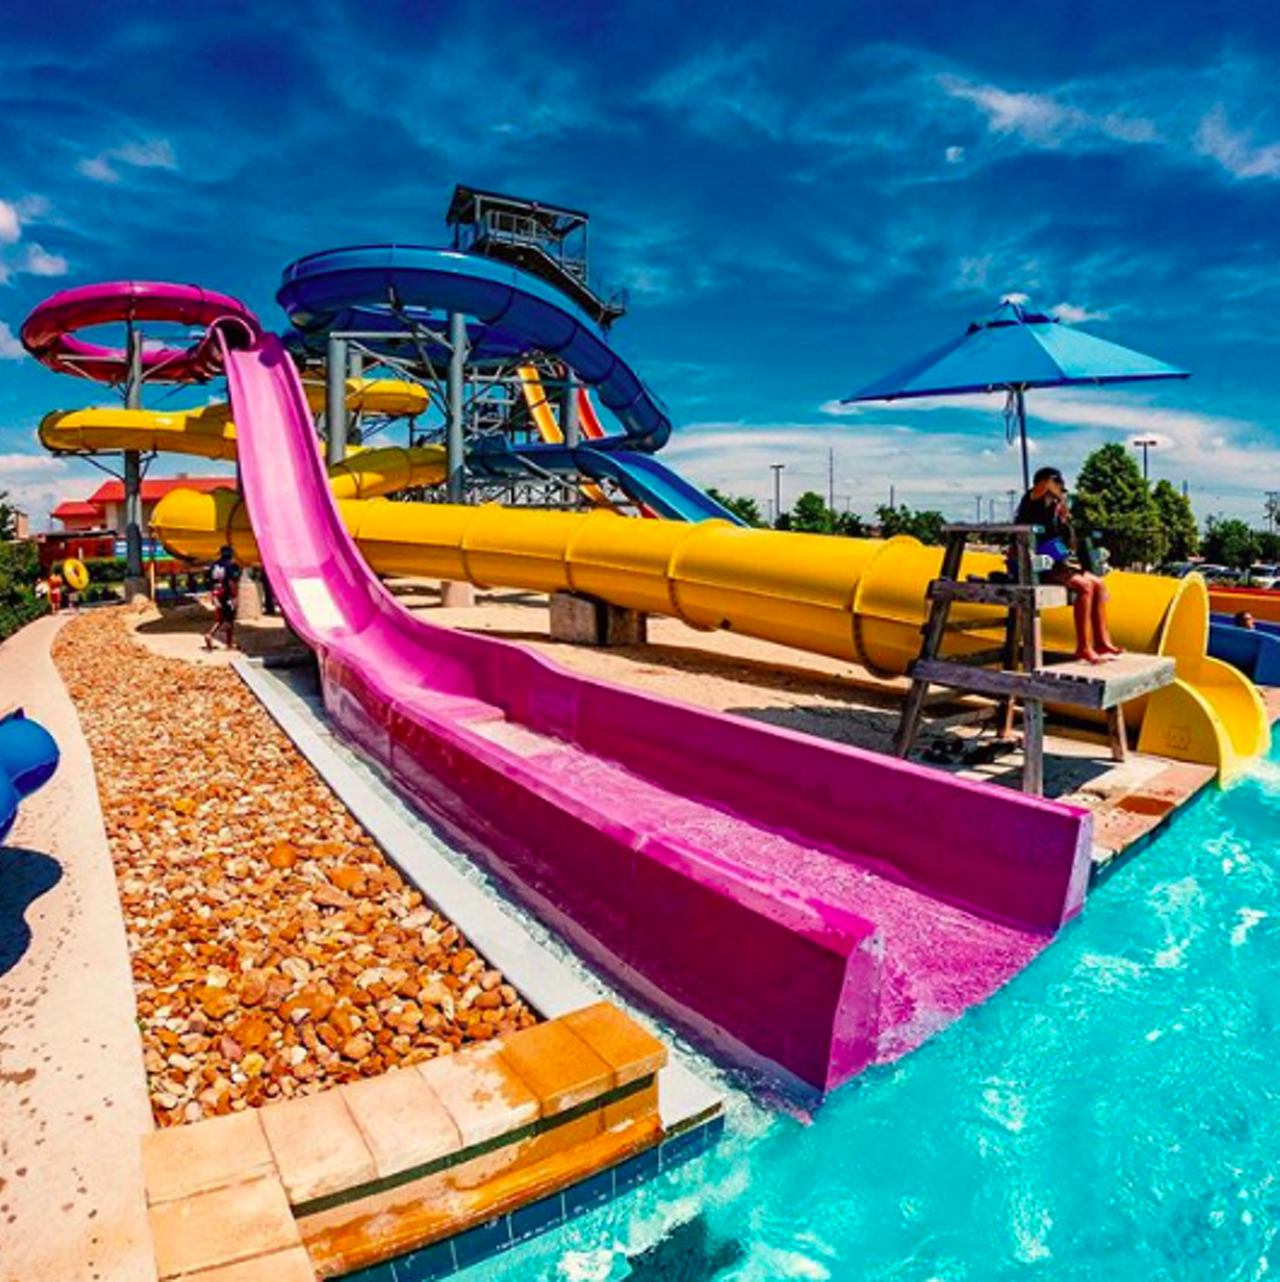 Typhoon Texas Austin
18500 TX-130 Service Road, Pflugerville, (512) 212-7792, typhoontexas.com
Formerly known as Hawaiian Falls Pflugerville, this Central Texas water getaway has all the fun you’re looking for this summer. There’s plenty of water-based attractions here, from Buckaroo Bayou and Tidal Wave Bay to the PFlowRider surf simulator and Lazy-T river. Everyone in the family can enjoy age-appropriate attractions that they’ll come to love.
Photo via Instagram / tuberides